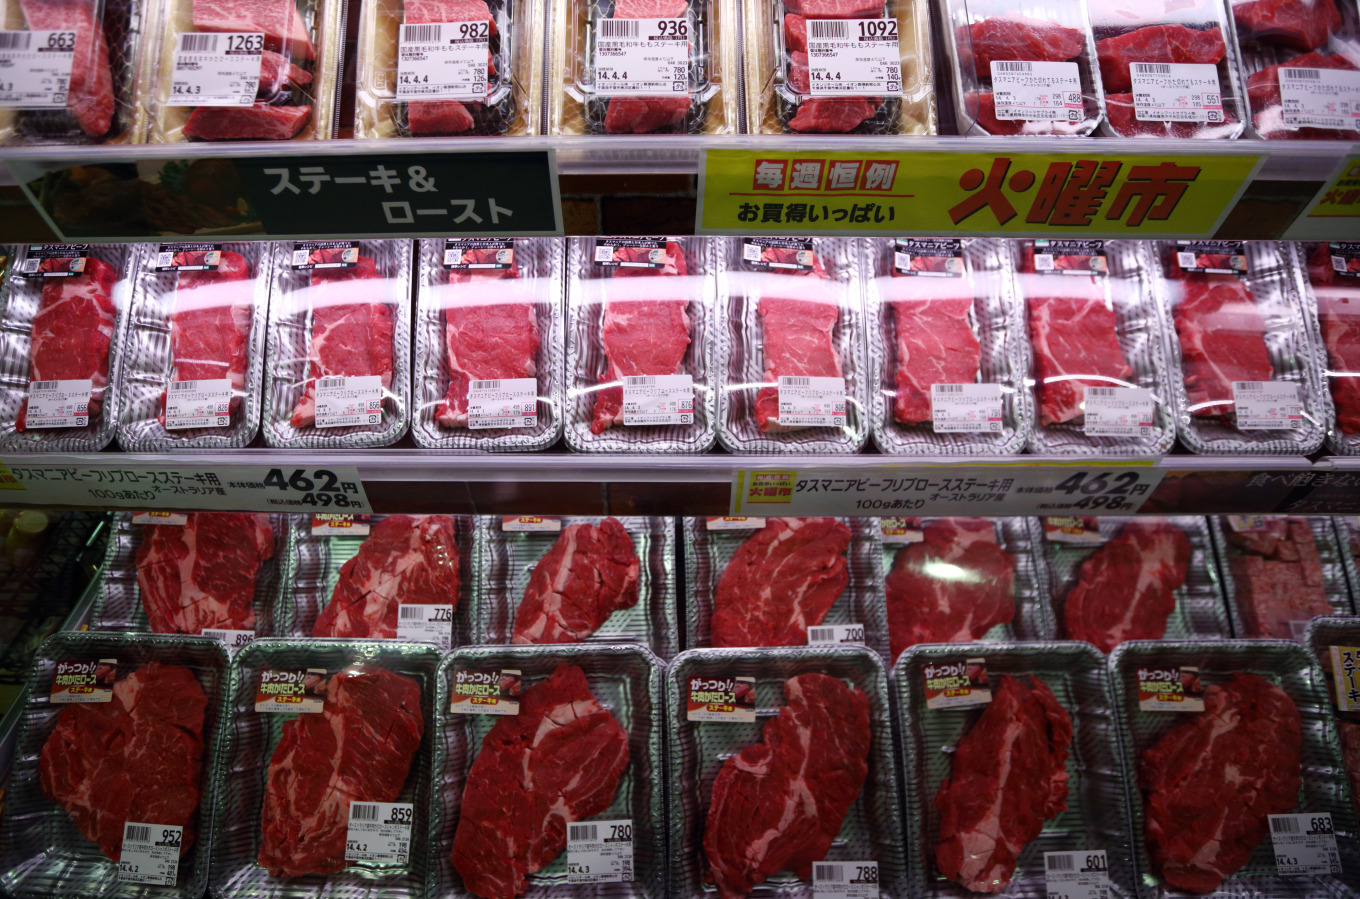 Japanese Beef Lovers Seen Boosting Imports to 17-Year High - Bloomberg